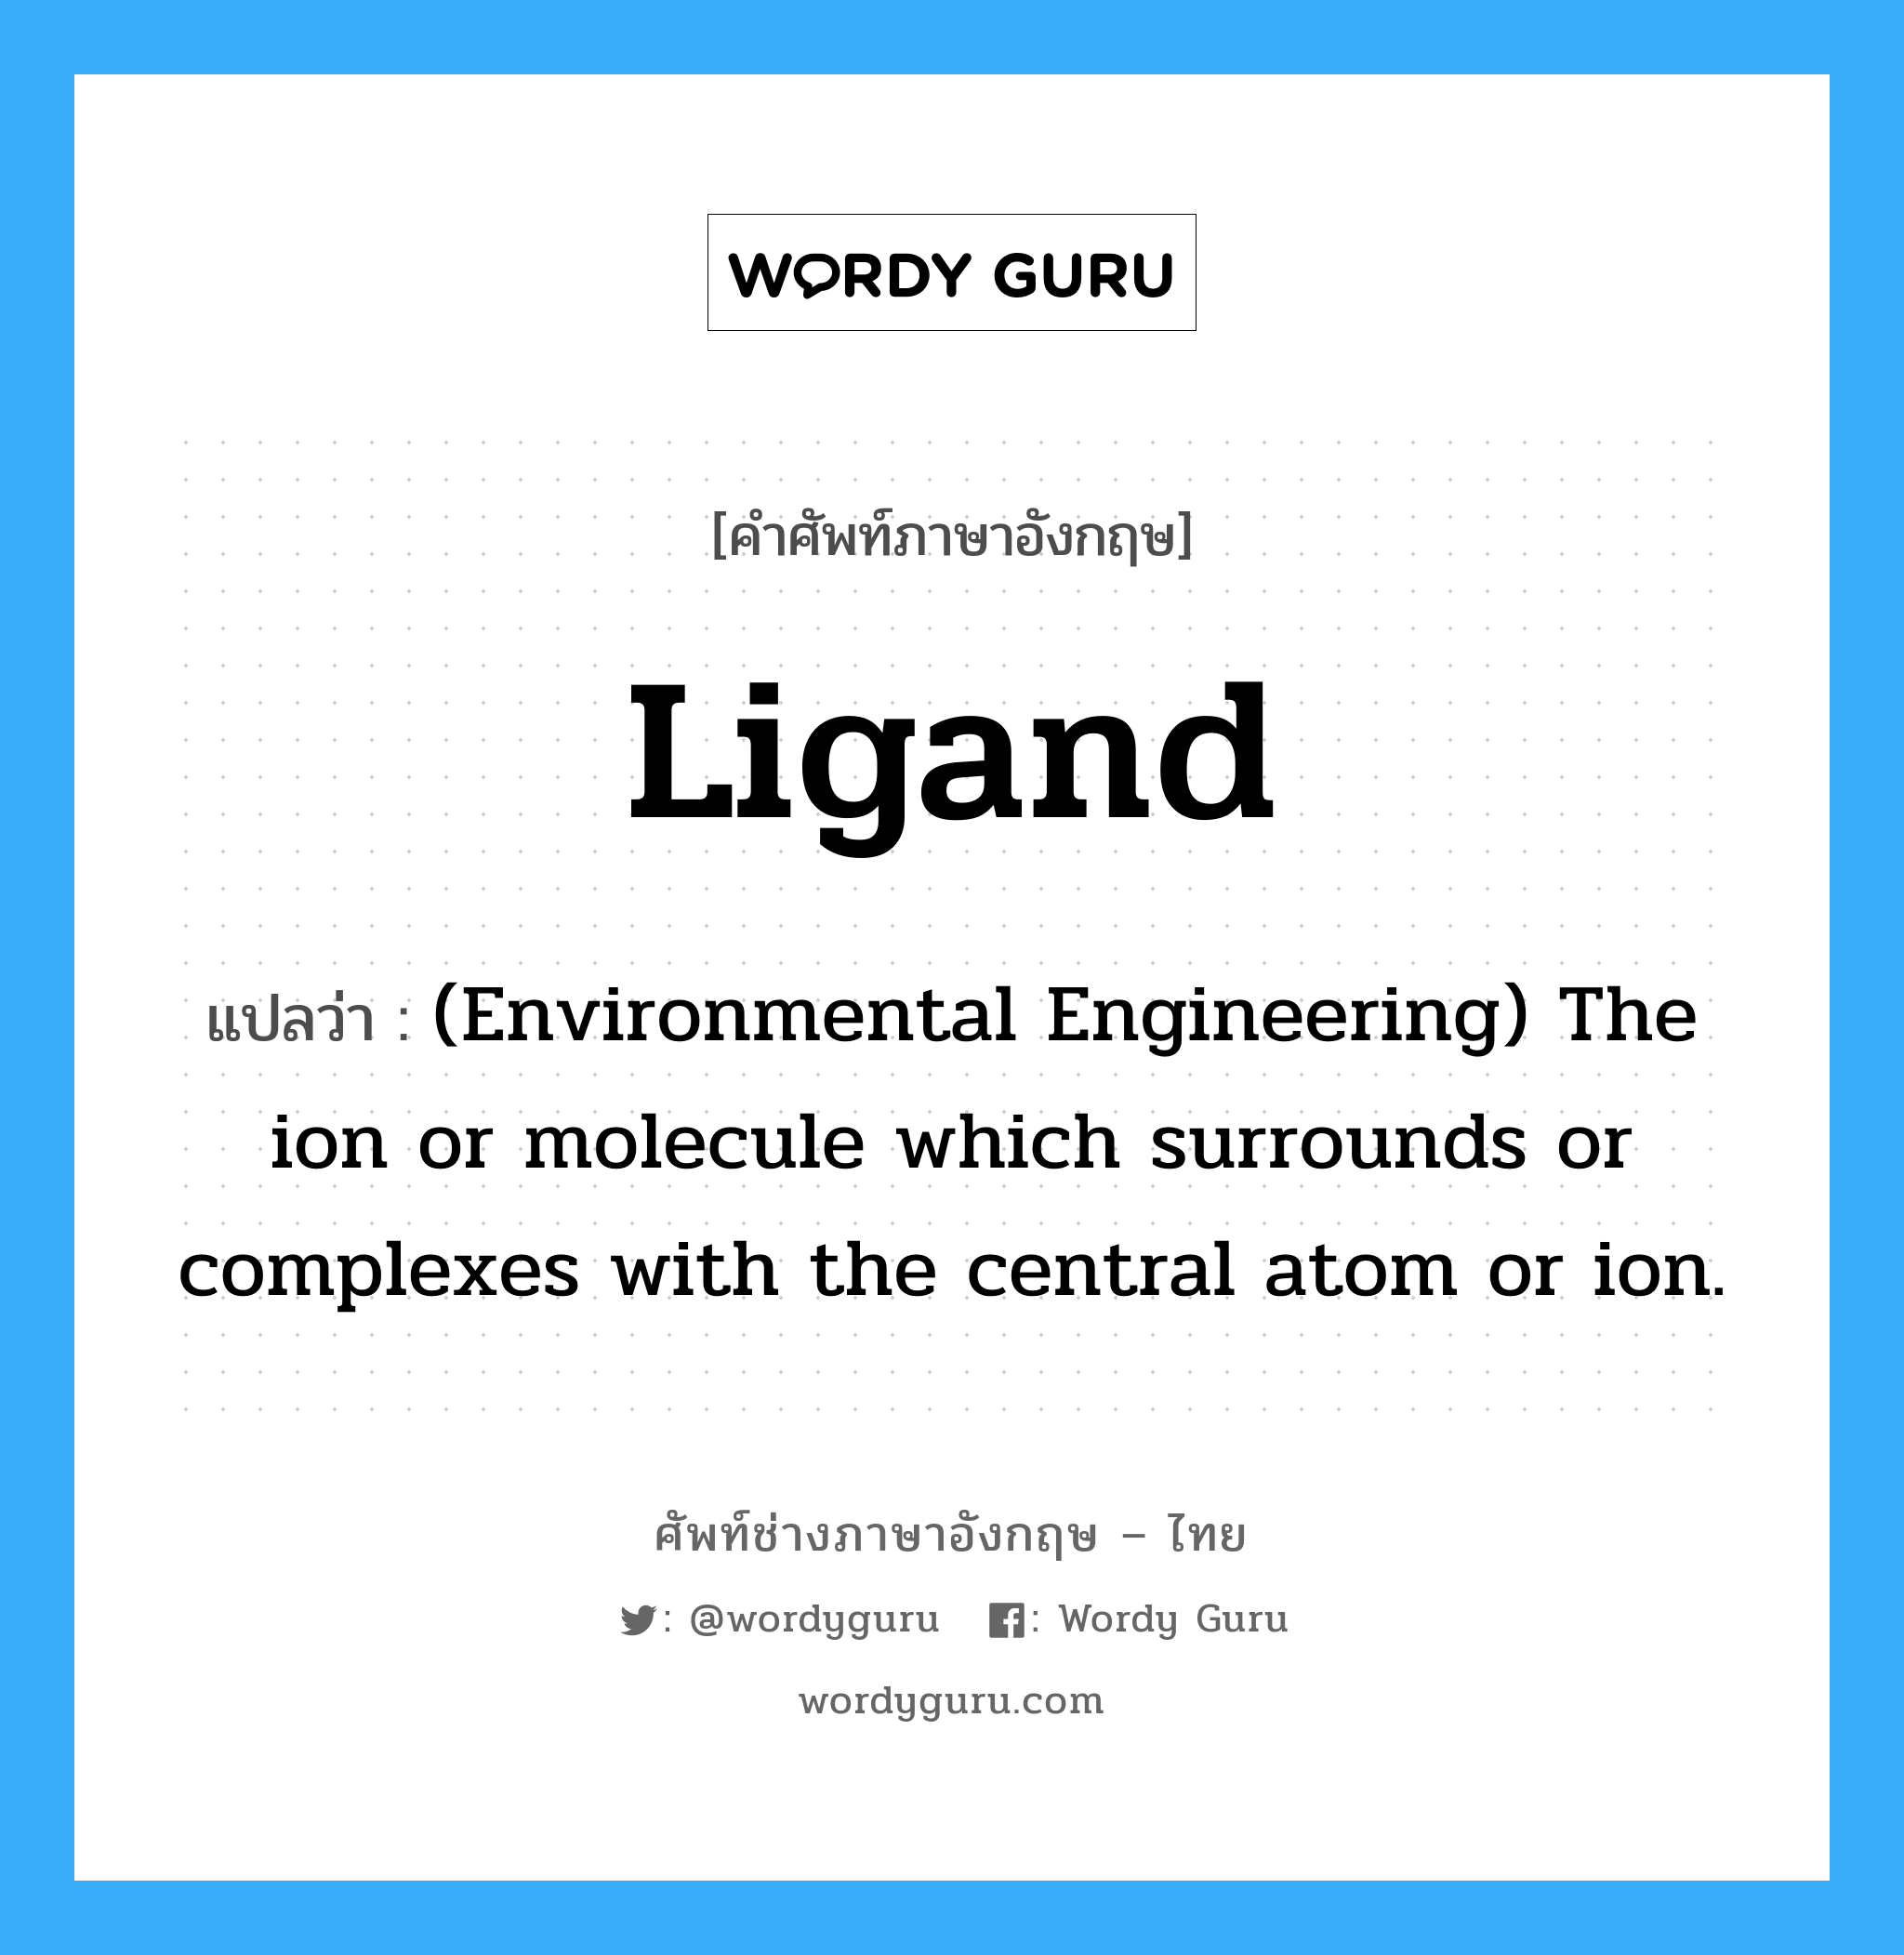 Ligand แปลว่า?, คำศัพท์ช่างภาษาอังกฤษ - ไทย Ligand คำศัพท์ภาษาอังกฤษ Ligand แปลว่า (Environmental Engineering) The ion or molecule which surrounds or complexes with the central atom or ion.